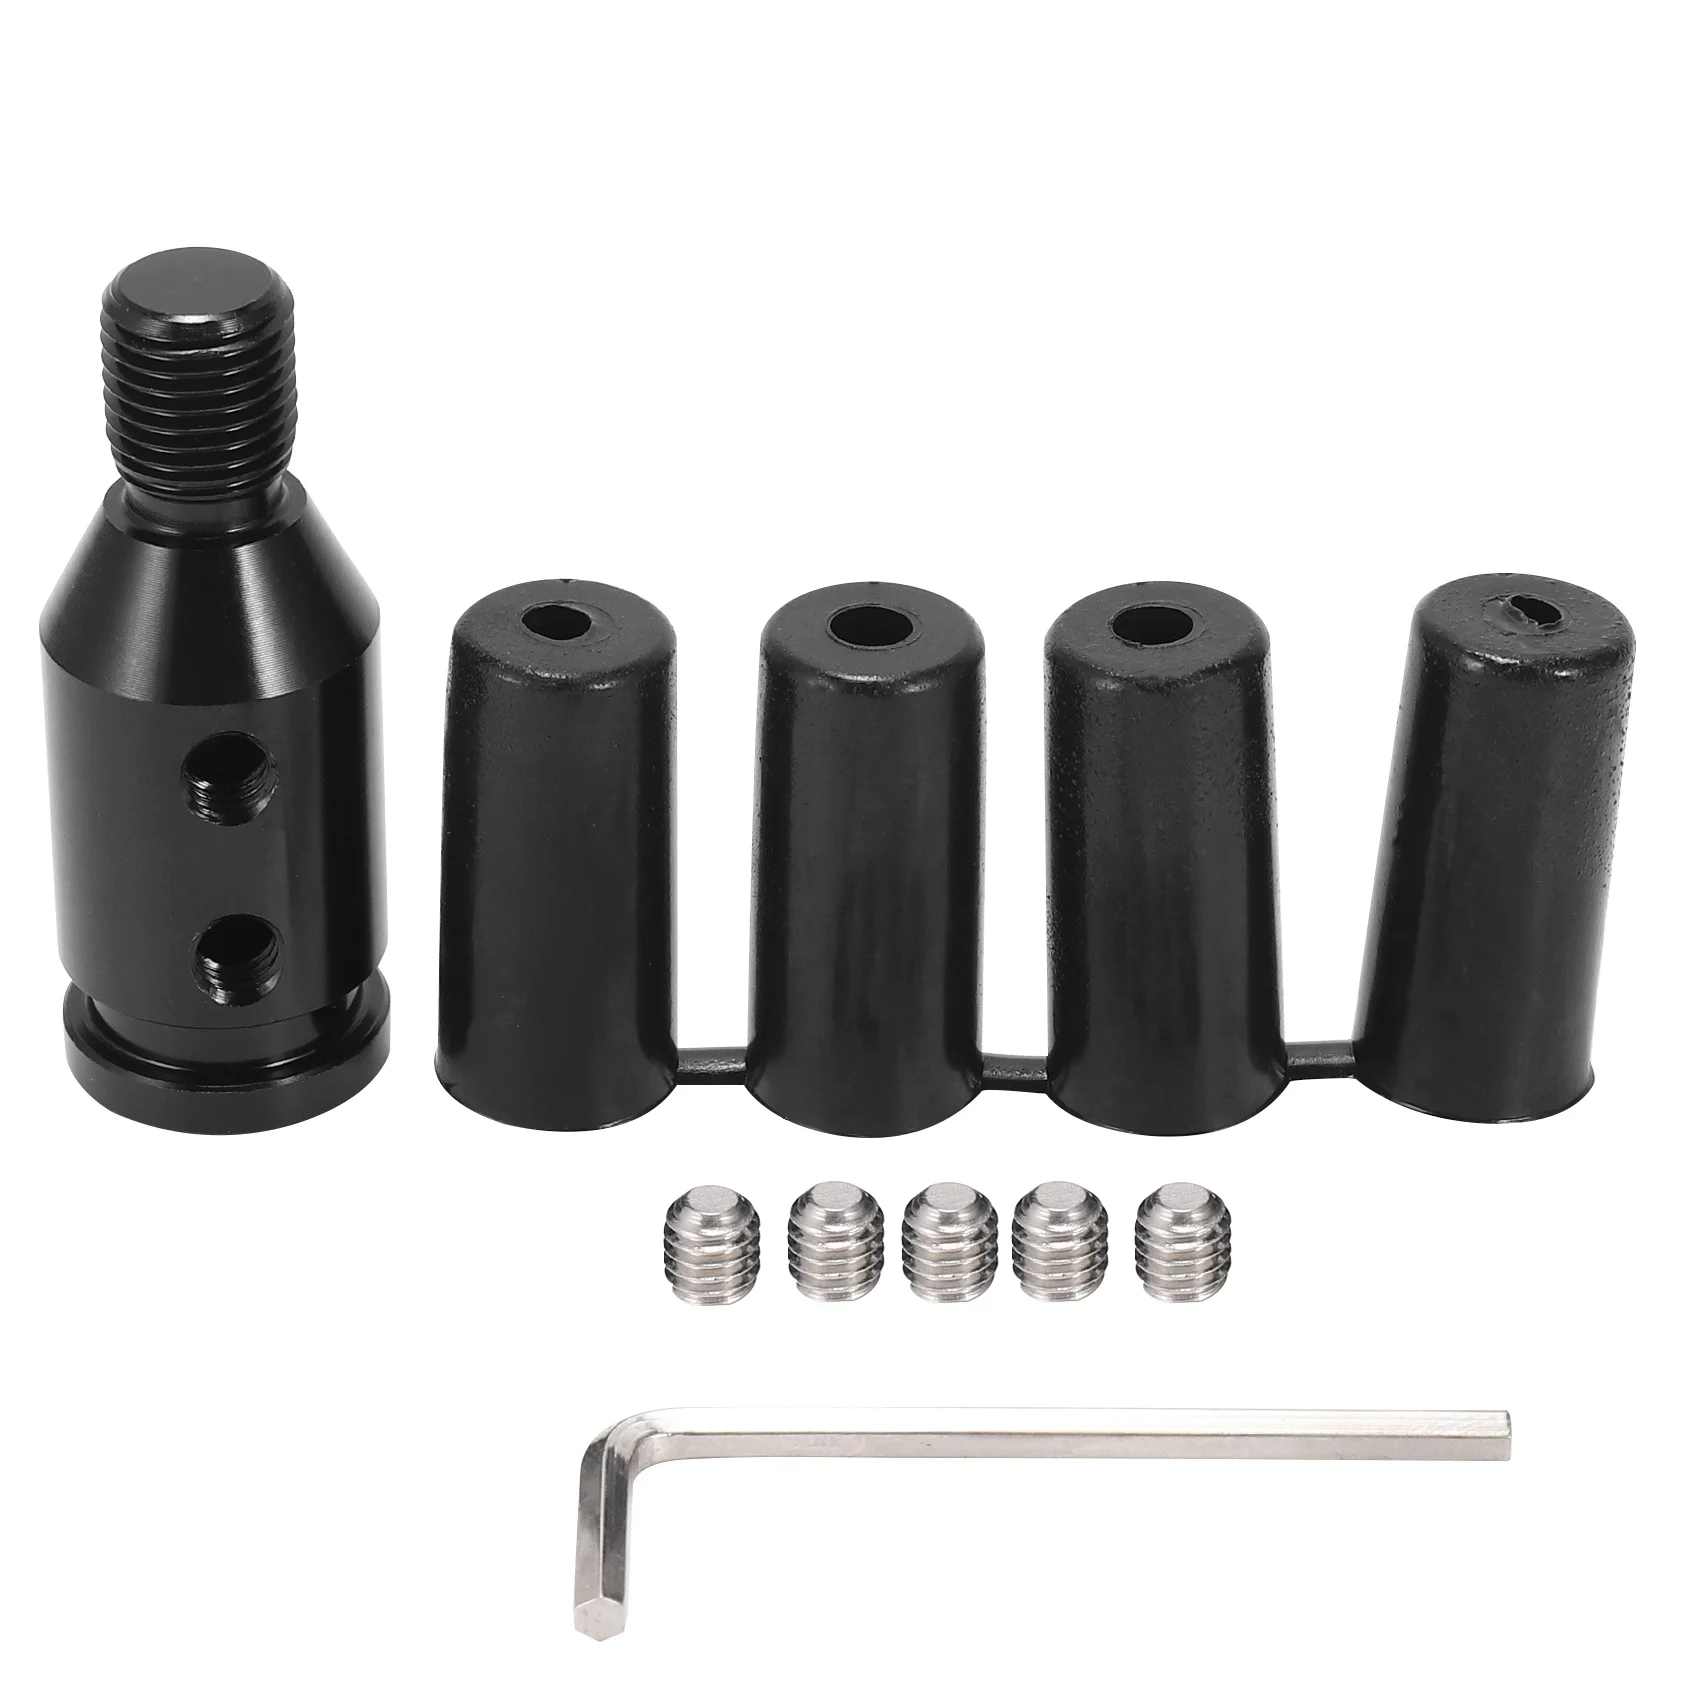 Universal Aluminum Shift Knob Adapter For Non Threaded Shifters 12X1.25Mm,Car Accessories (Black)